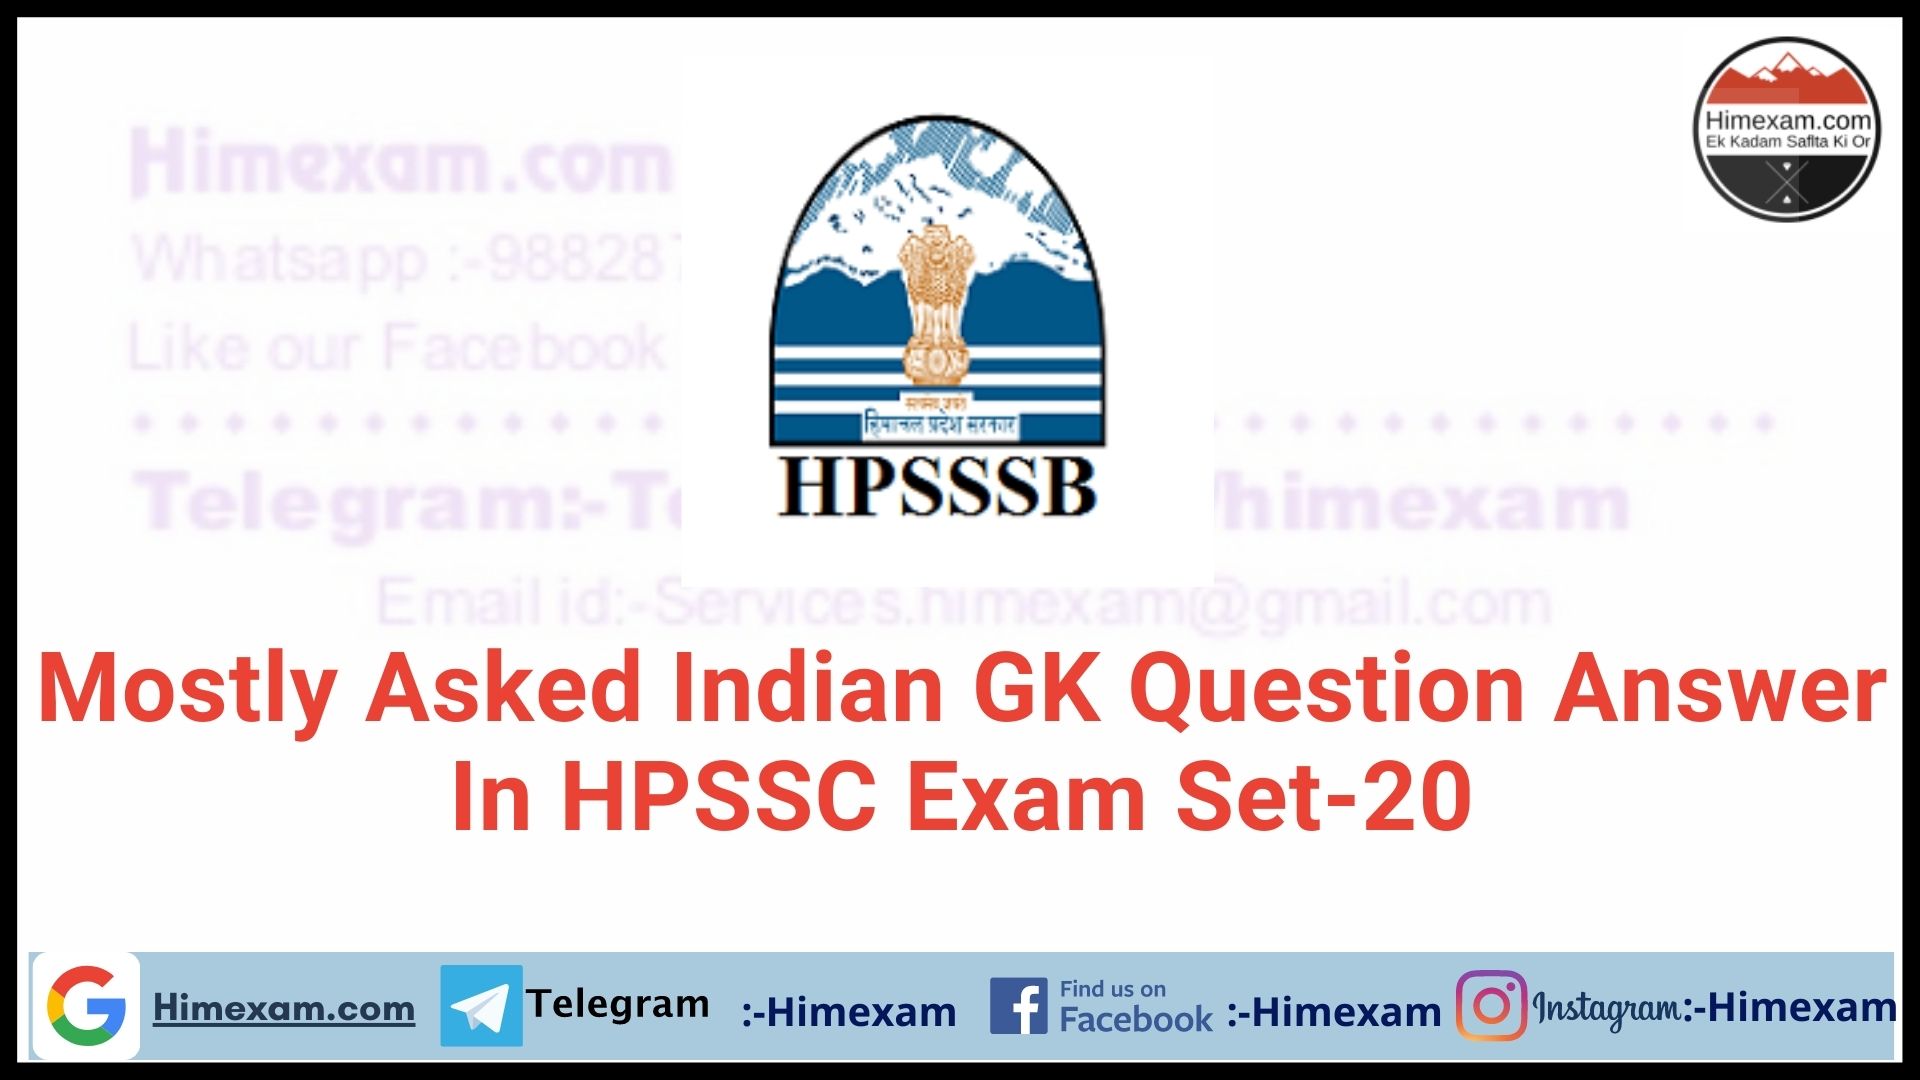 Mostly Asked Indian GK Question Answer In HPSSC Exam Set-20